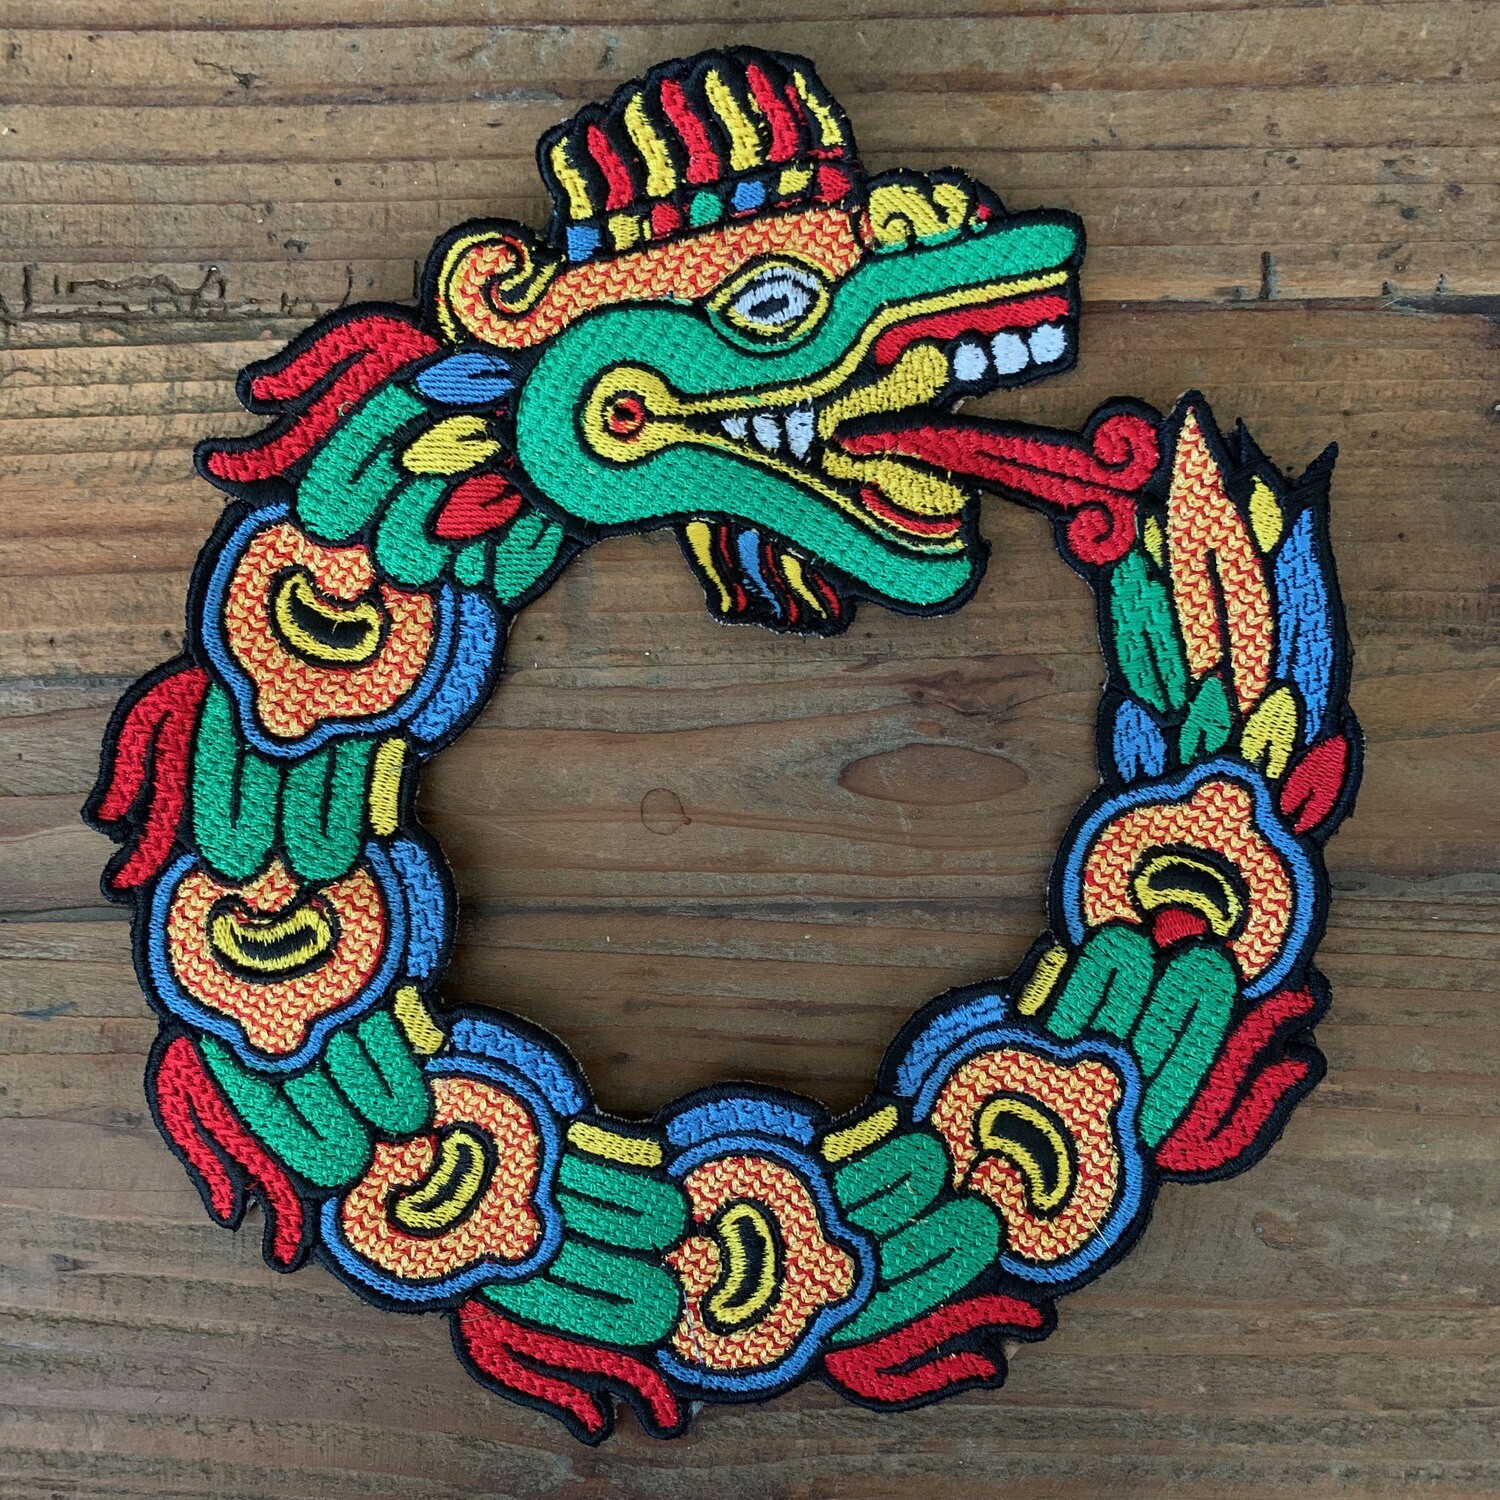 Quetzalcoatl Ouroboros Serpent Large Embroidered Patch